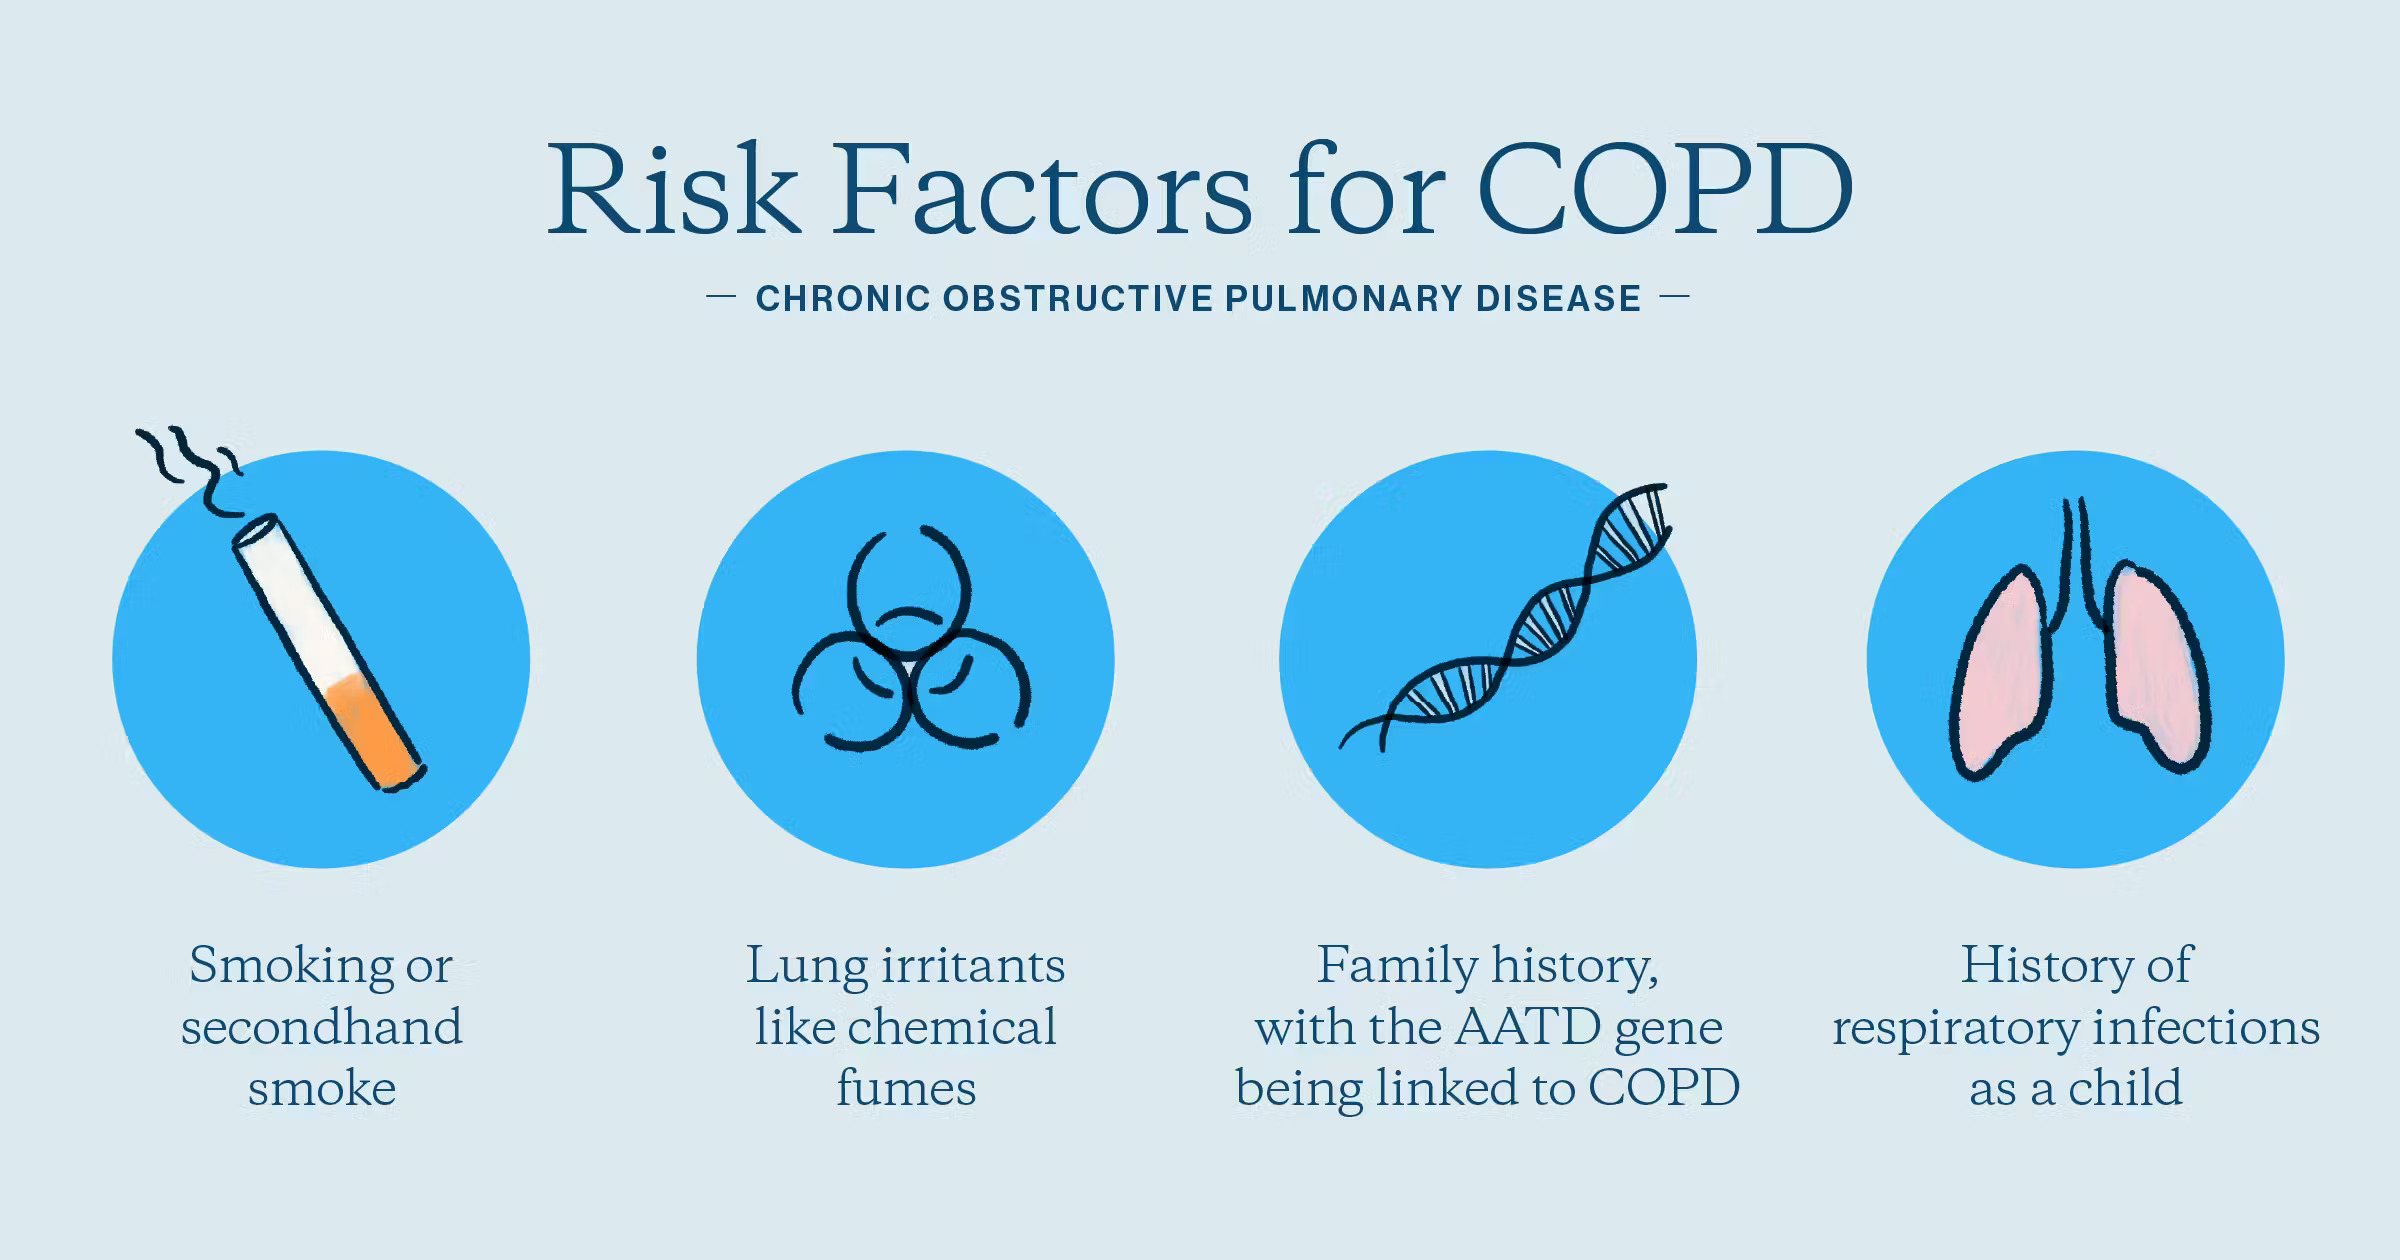 COPD causes